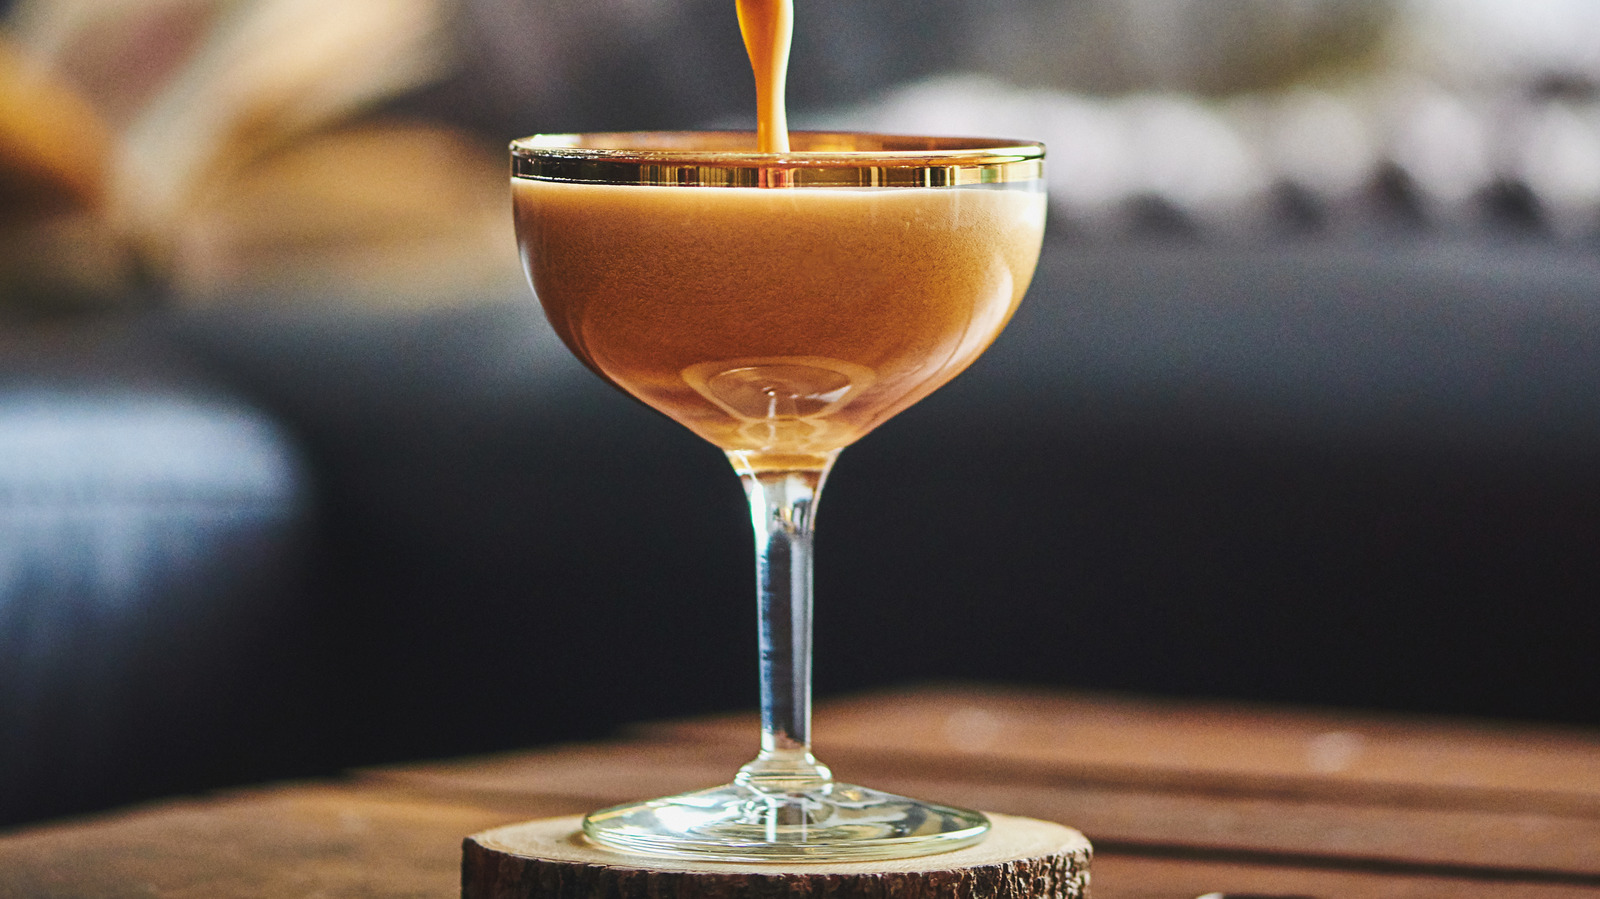 https://www.foodrepublic.com/img/gallery/elevate-espresso-martinis-with-another-creamy-coffee-ingredient/l-intro-1700582646.jpg